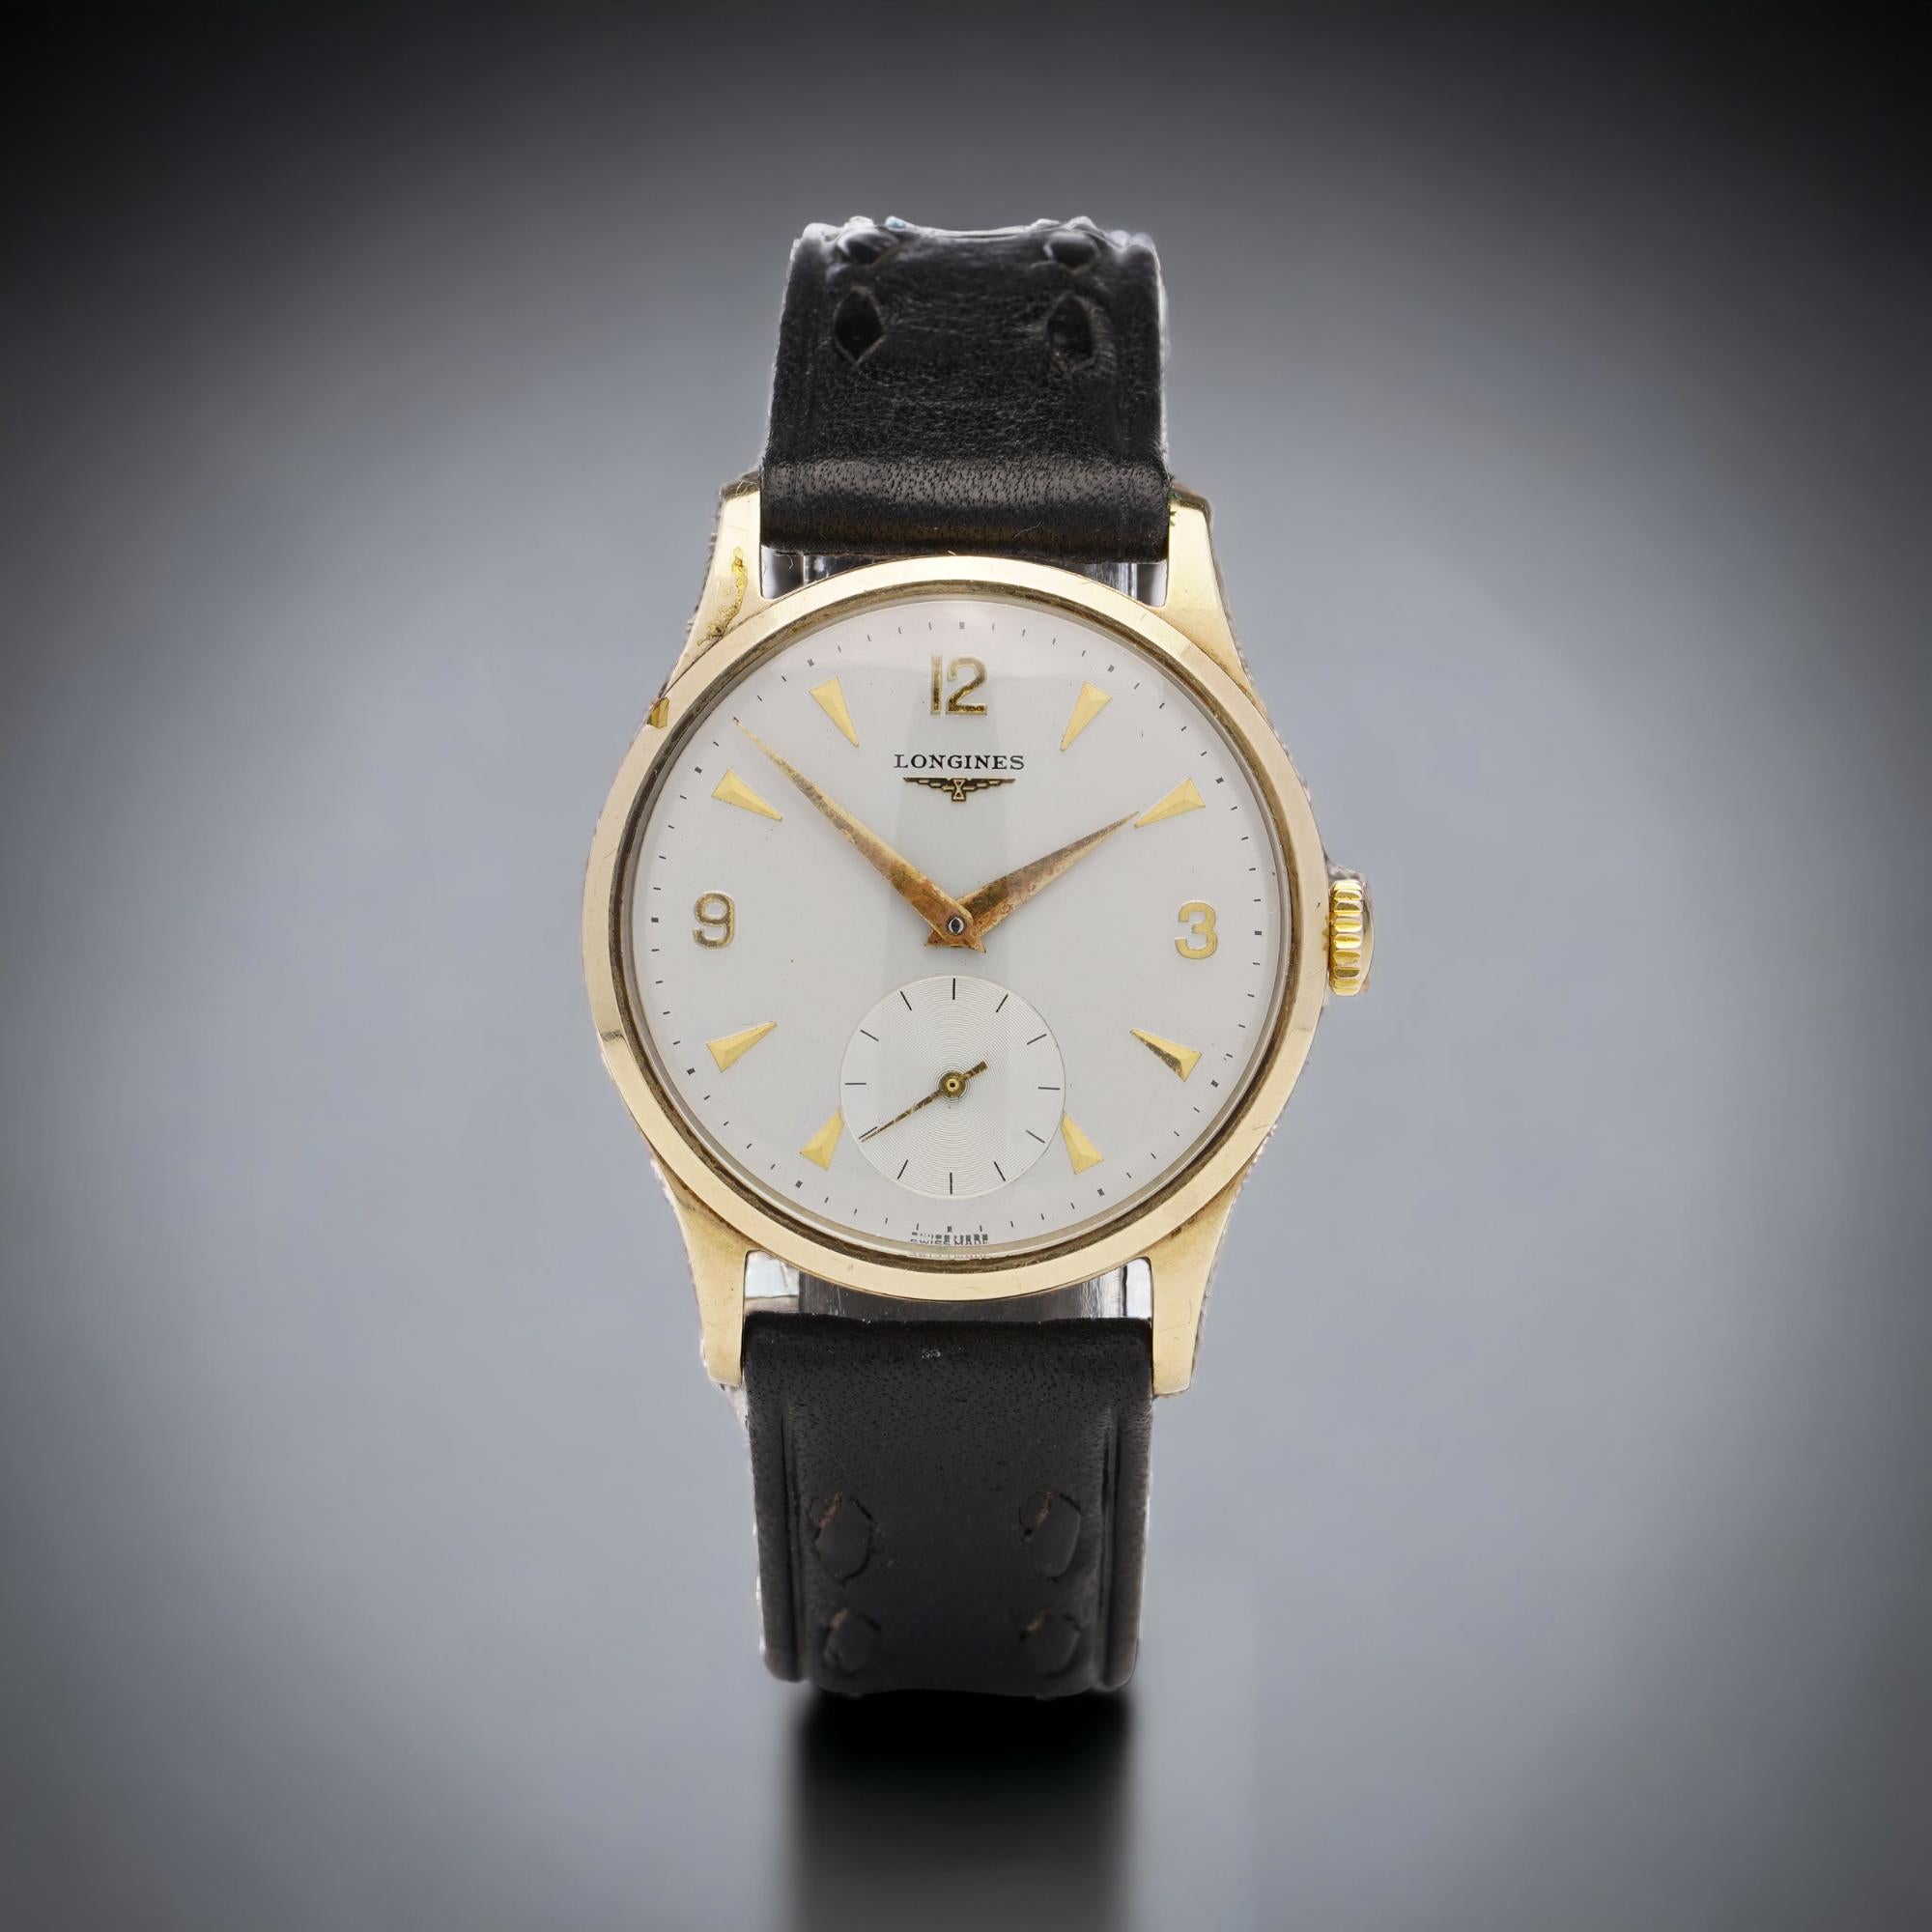 Longines 9kt. yellow gold men's manual winding wristwatch. 
Case was made in England, Birmingham, 1963

Year 1963
Reference Number: 503
Item Specifics:
Case Diameter (without crown): 33 mm
Case material: 9kt. gold. 
Bracelet material: leather